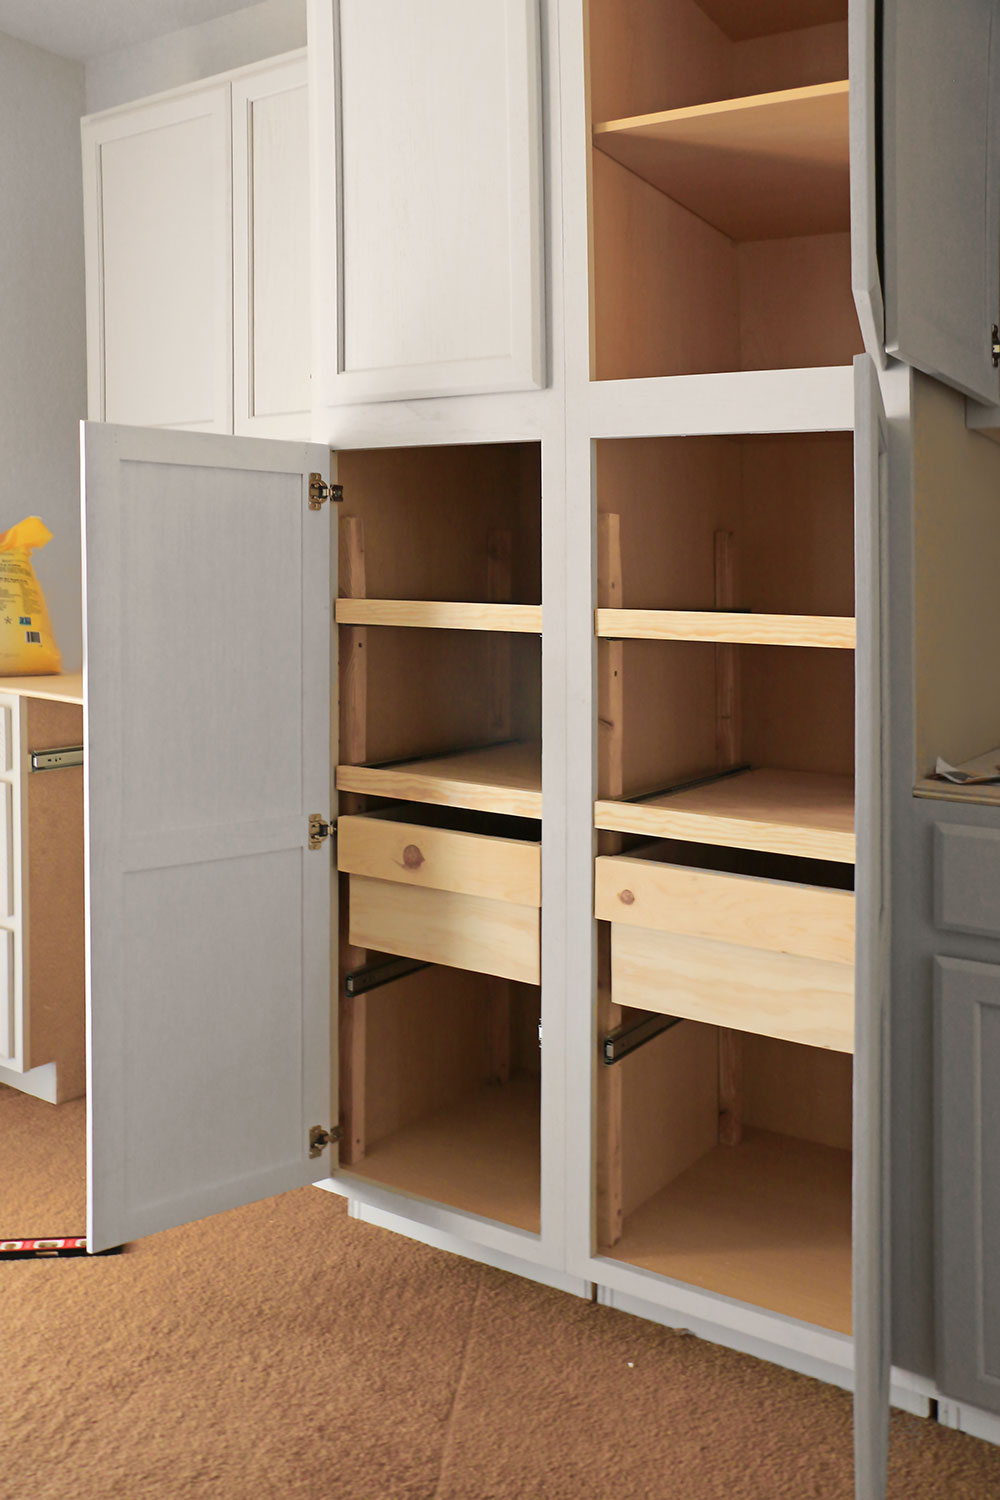 Craft Room Cabinets / Craft Room Building In Cabinets Part 3 Simply Designing With Ashley - You don't have to spend a ton of money on new furniture for your craft room.